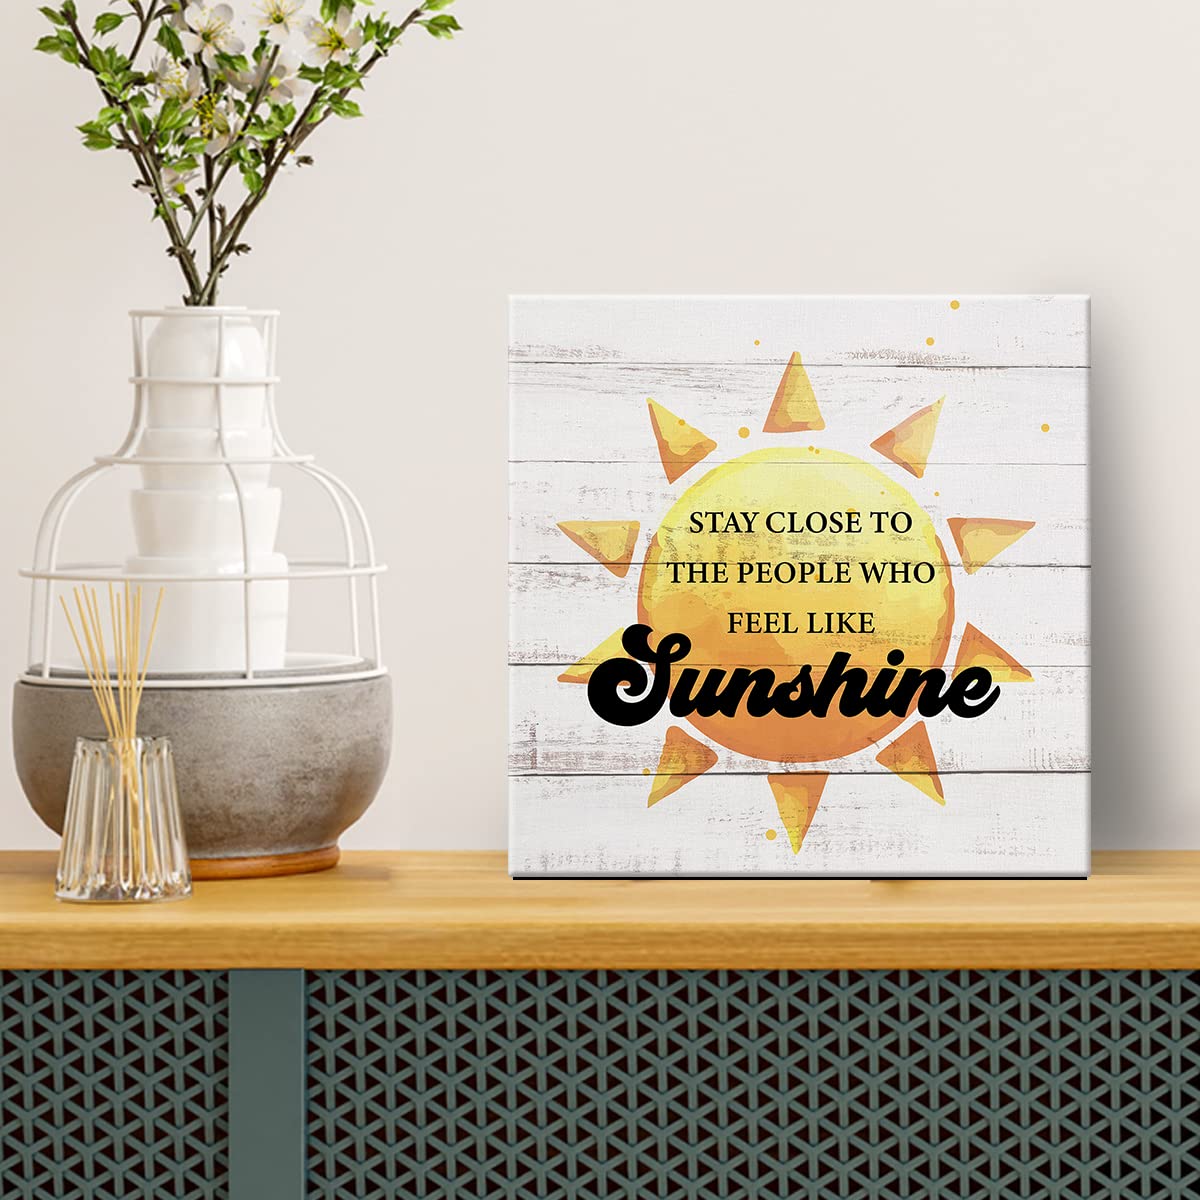 Country Stay Close to the People Who Feel Like Sunshine Sun Canvas Prints Wall Art Decor Desk Sign Sunshine Quote Poster Painting Framed Artwork 8 x 8 Inch Rustic Home Office Shelf Wall Decoration